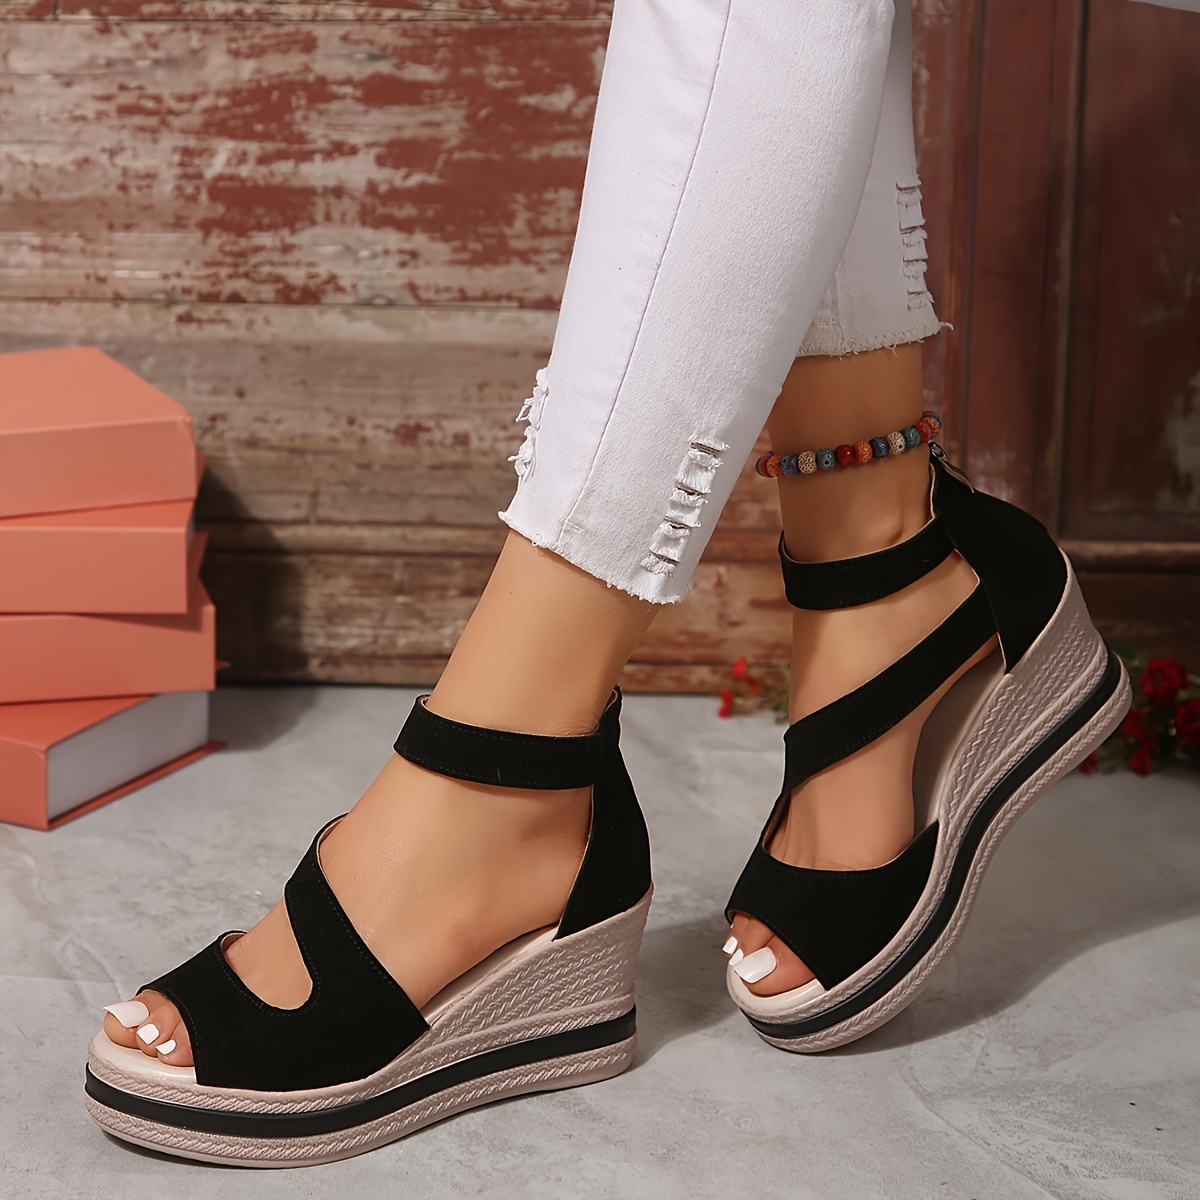 

Women's Platform Solid Color Sandals, Back Zipper Slip On Hollow Out Vacation Shoes, Comfort Wedge Beach Shoes